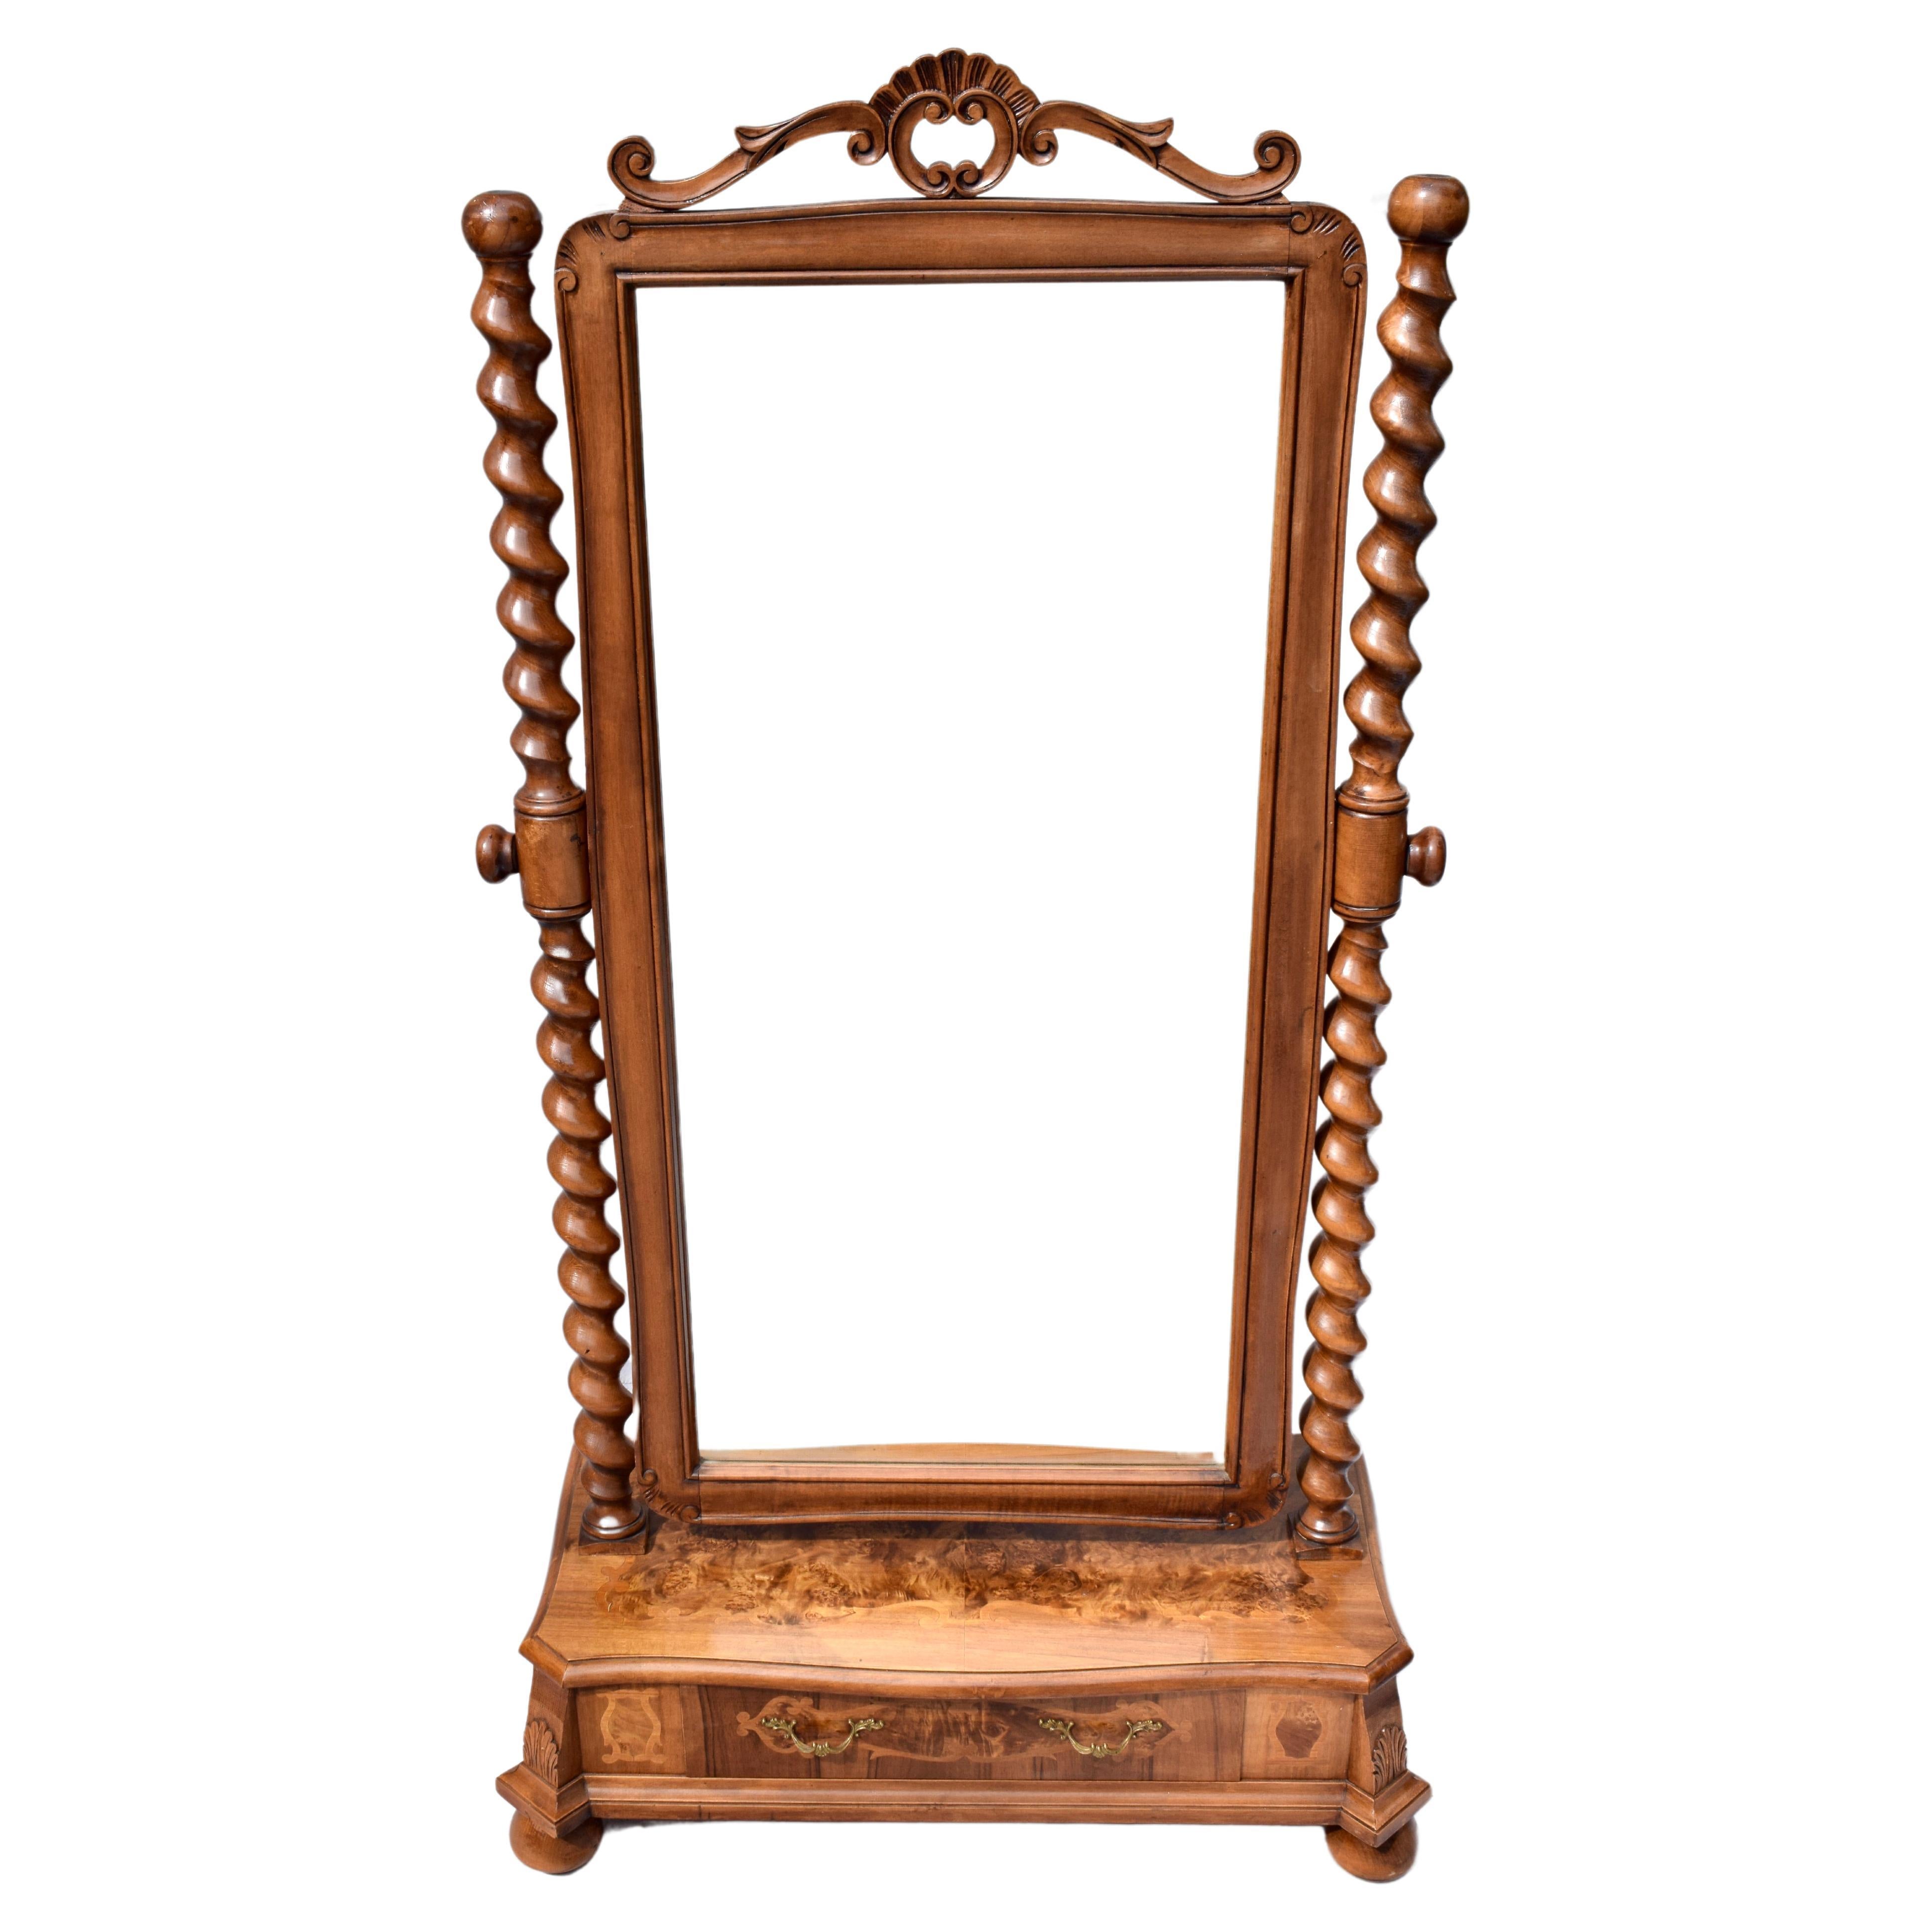 Antique Italian Baroque style burl olive & walnut 'barley-twist' cheval/dressing mirror with classically carved details. Two substantial barley twist columns insert solidly into the base boasting one generously sized dovetailed damask lined drawer